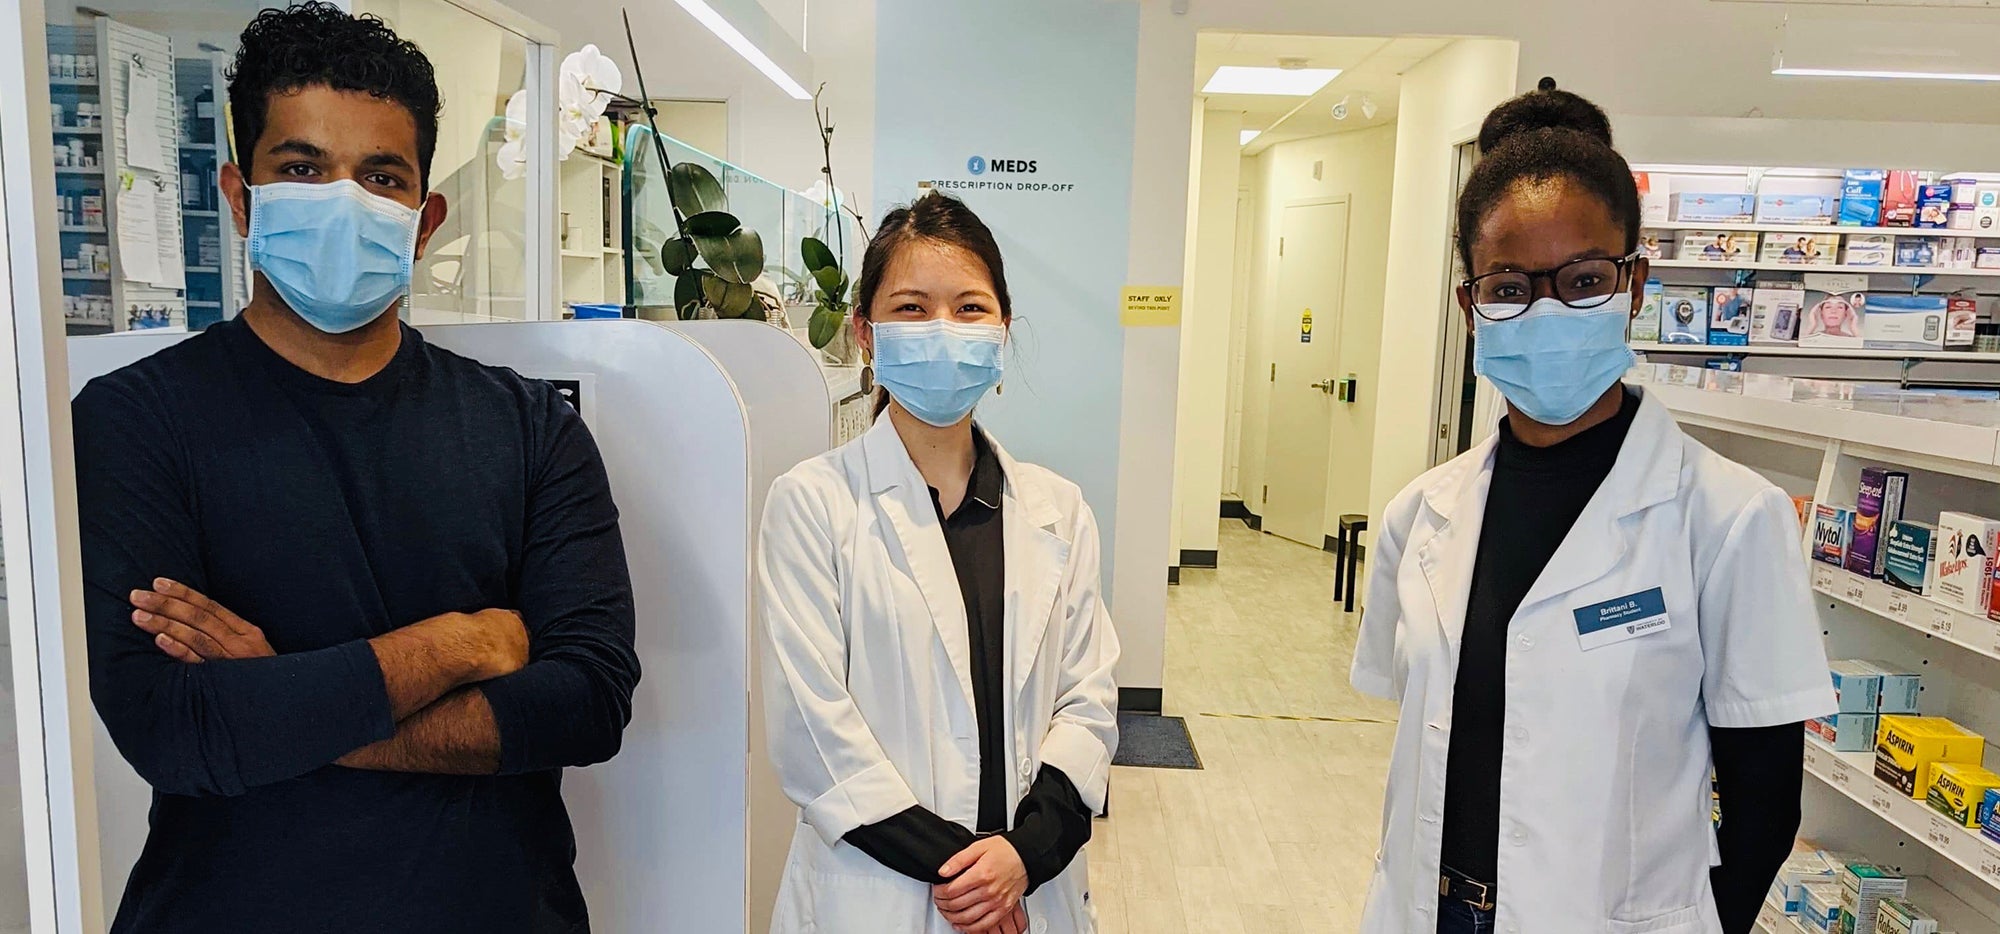 Three pharmacists wearing masks and standing in the pharmacy